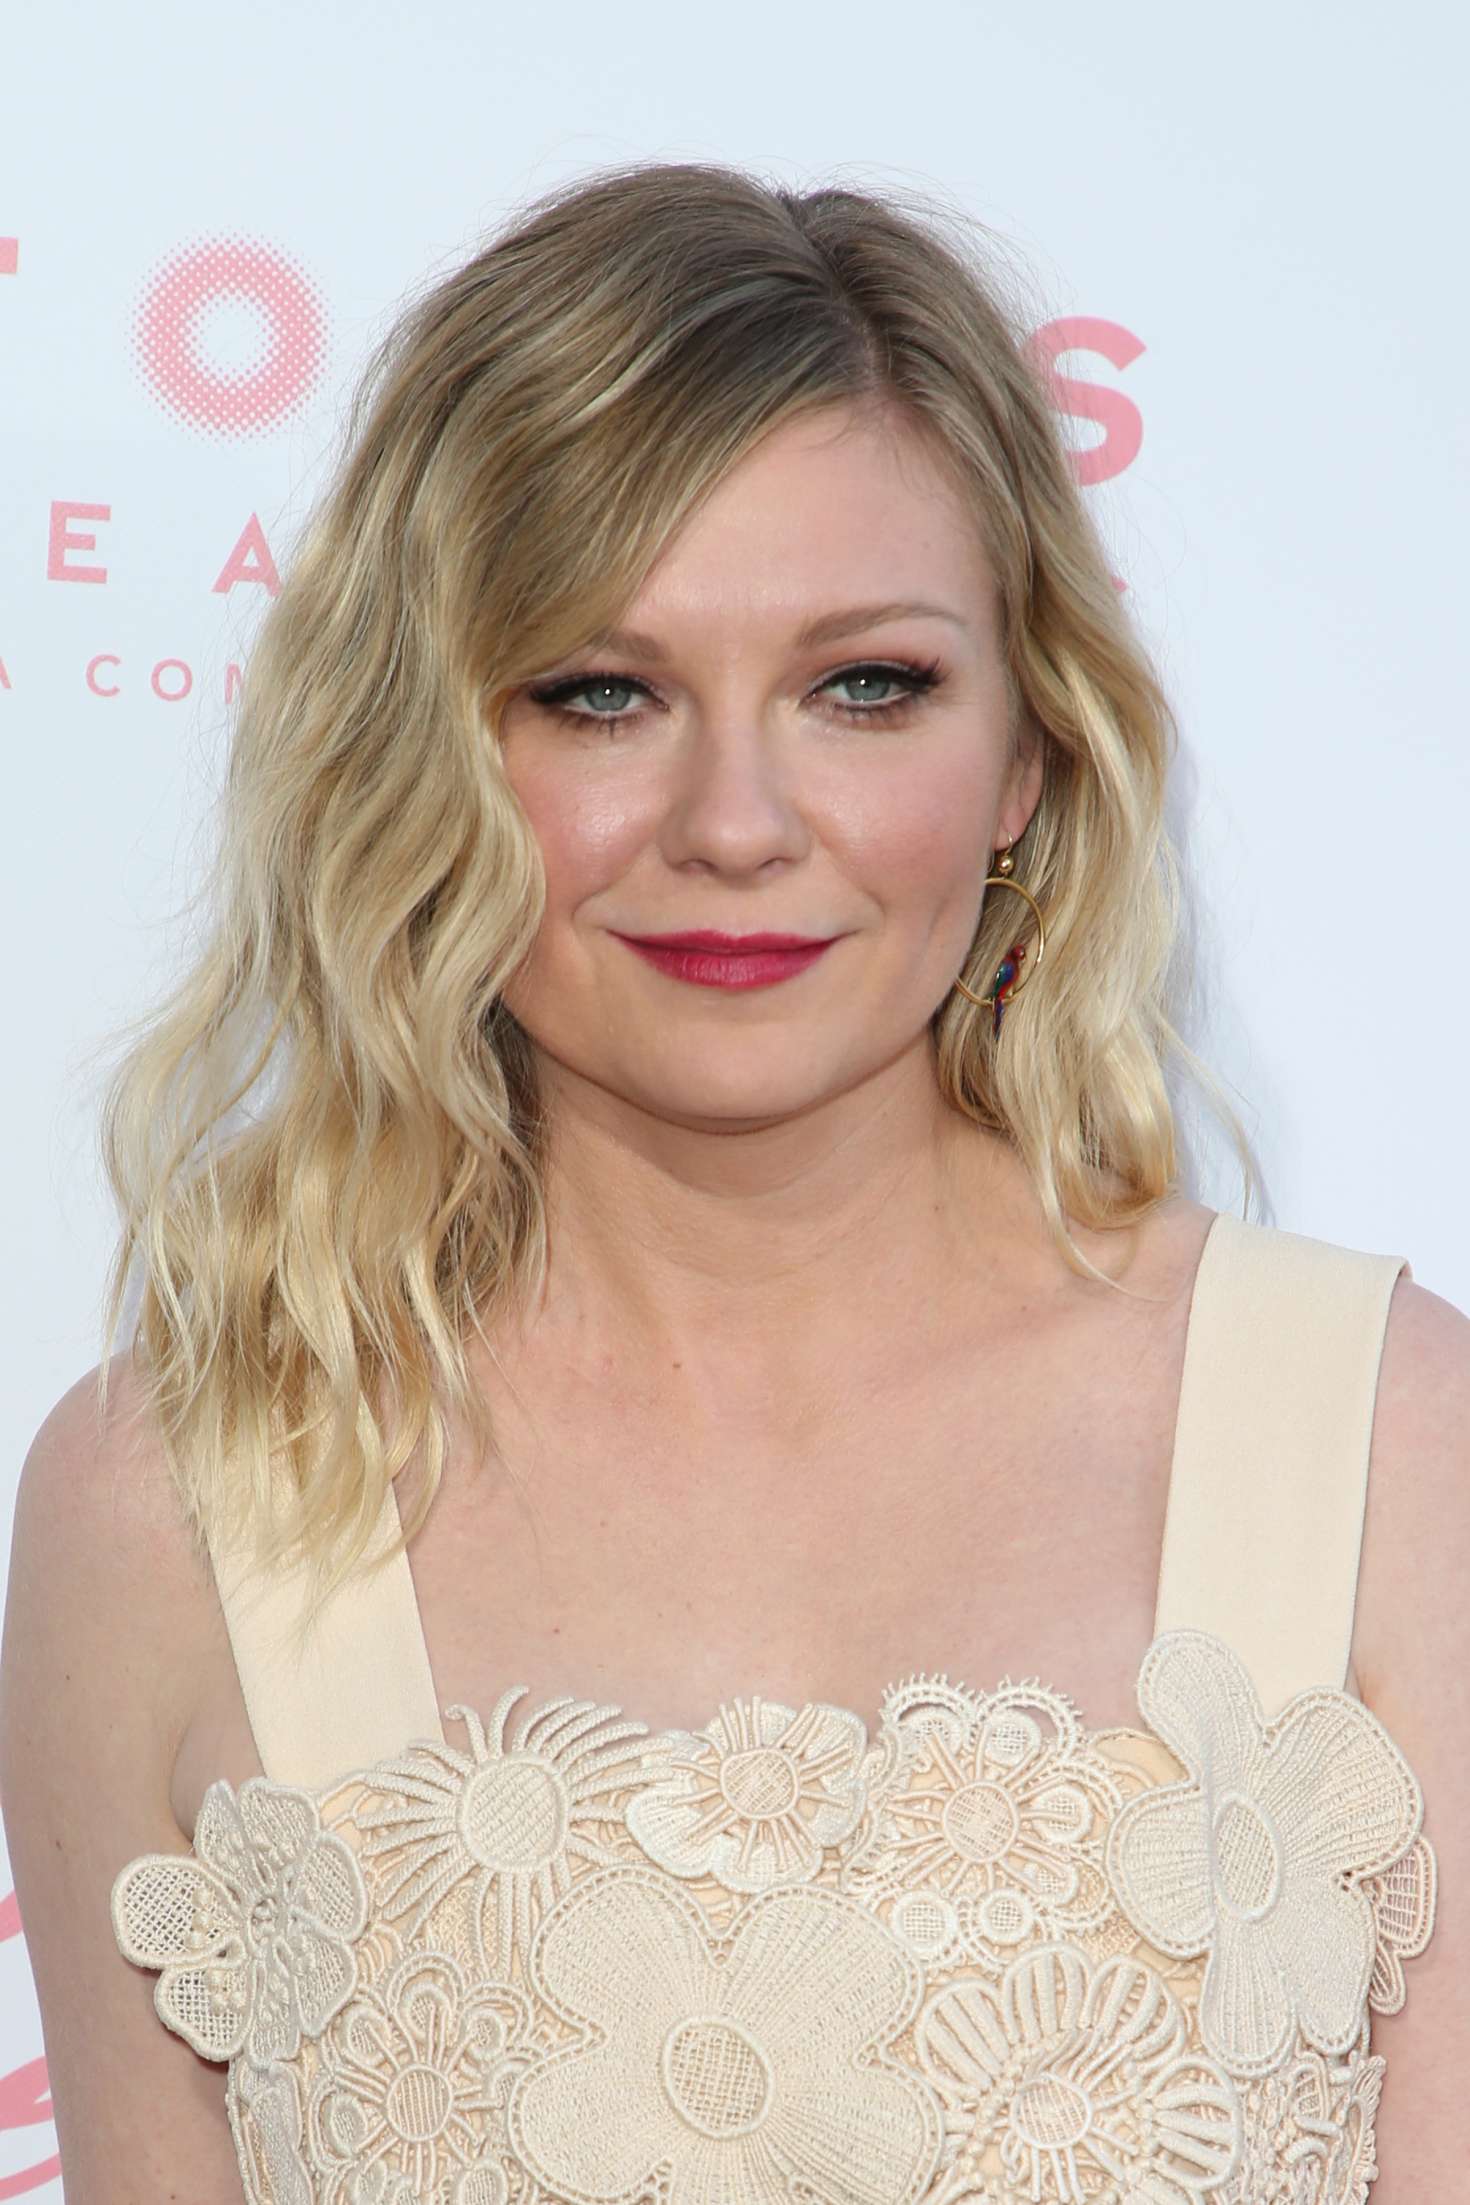 Kirsten Dunst The Beguiled Premiere In Los Angeles 40 Gotceleb